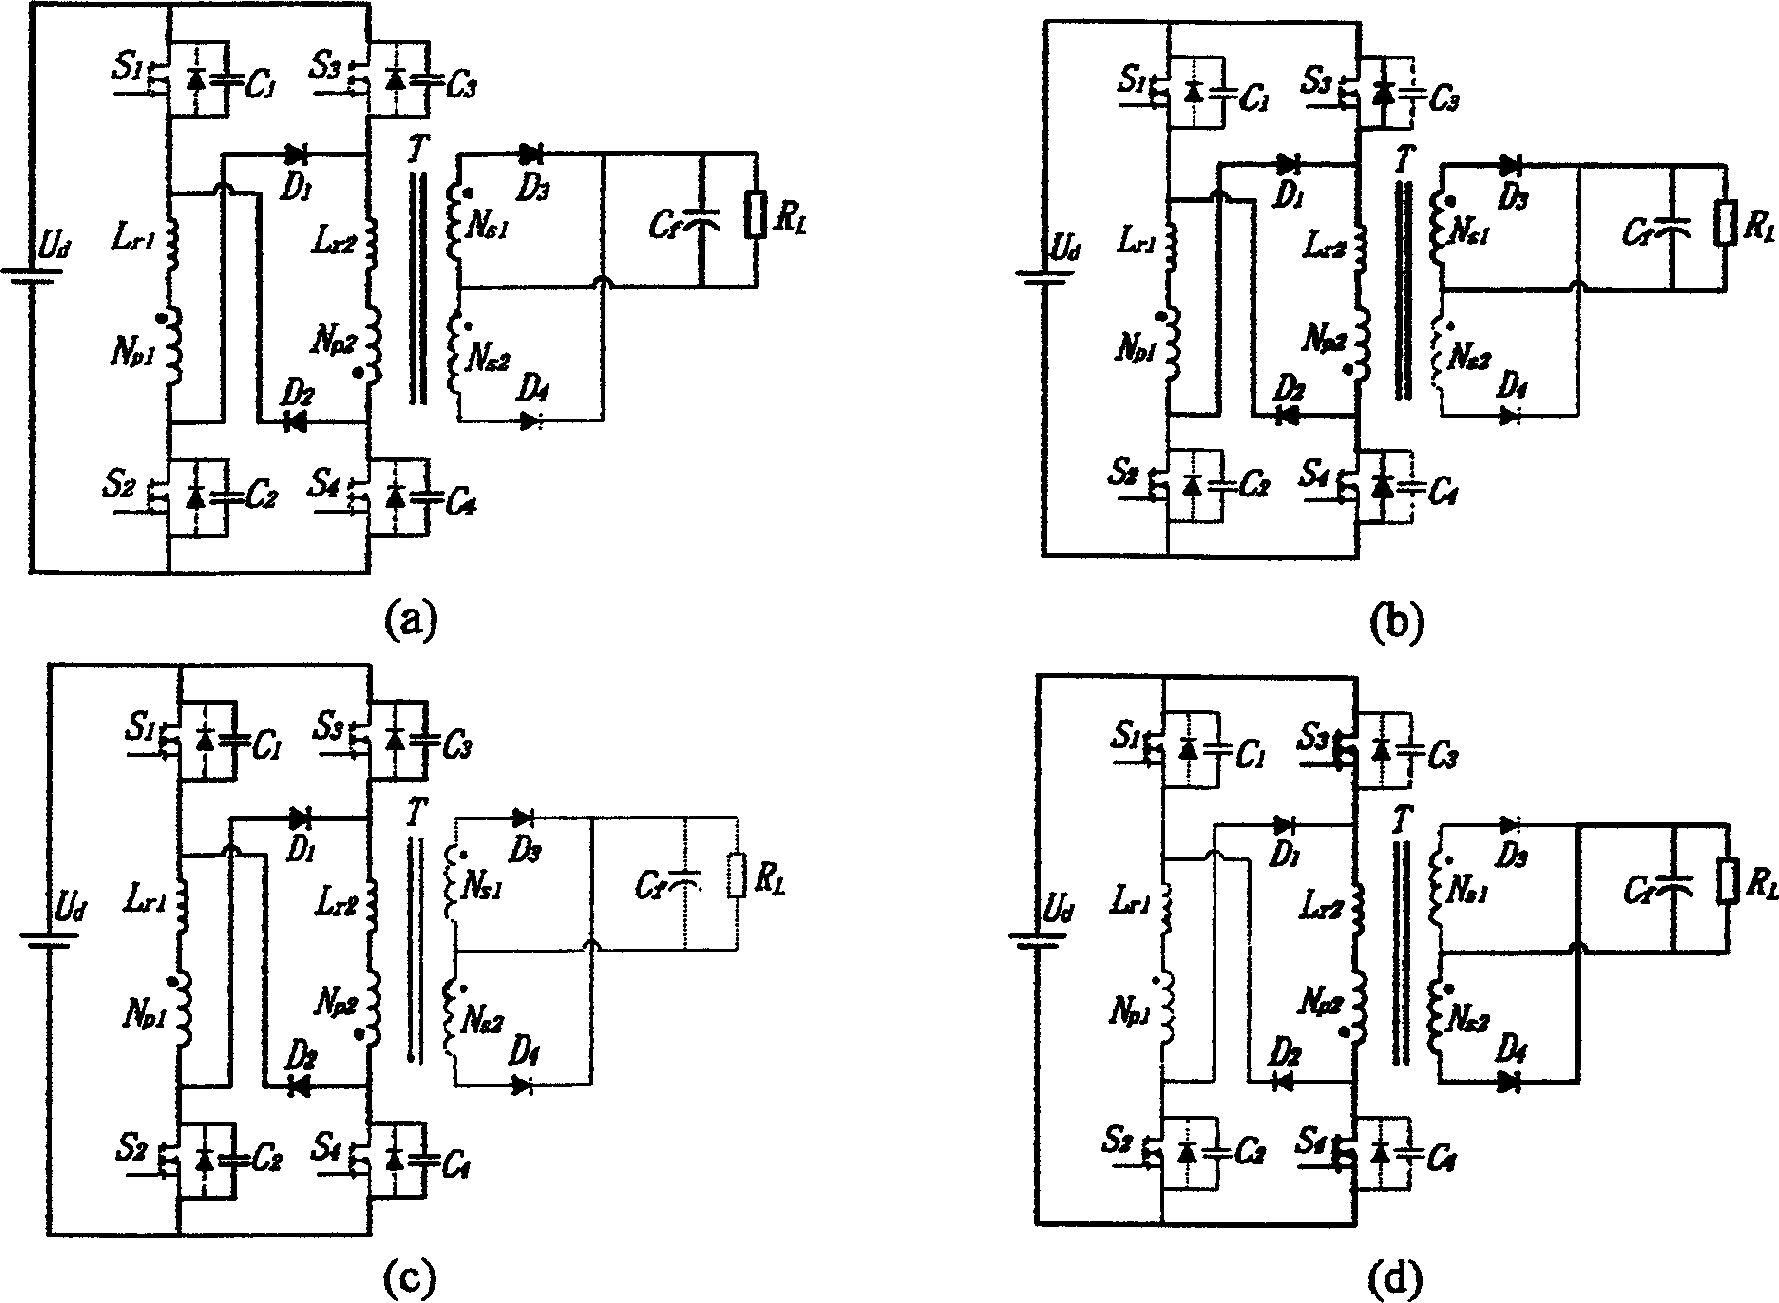 Two-way two-tube positive excitation converter topology